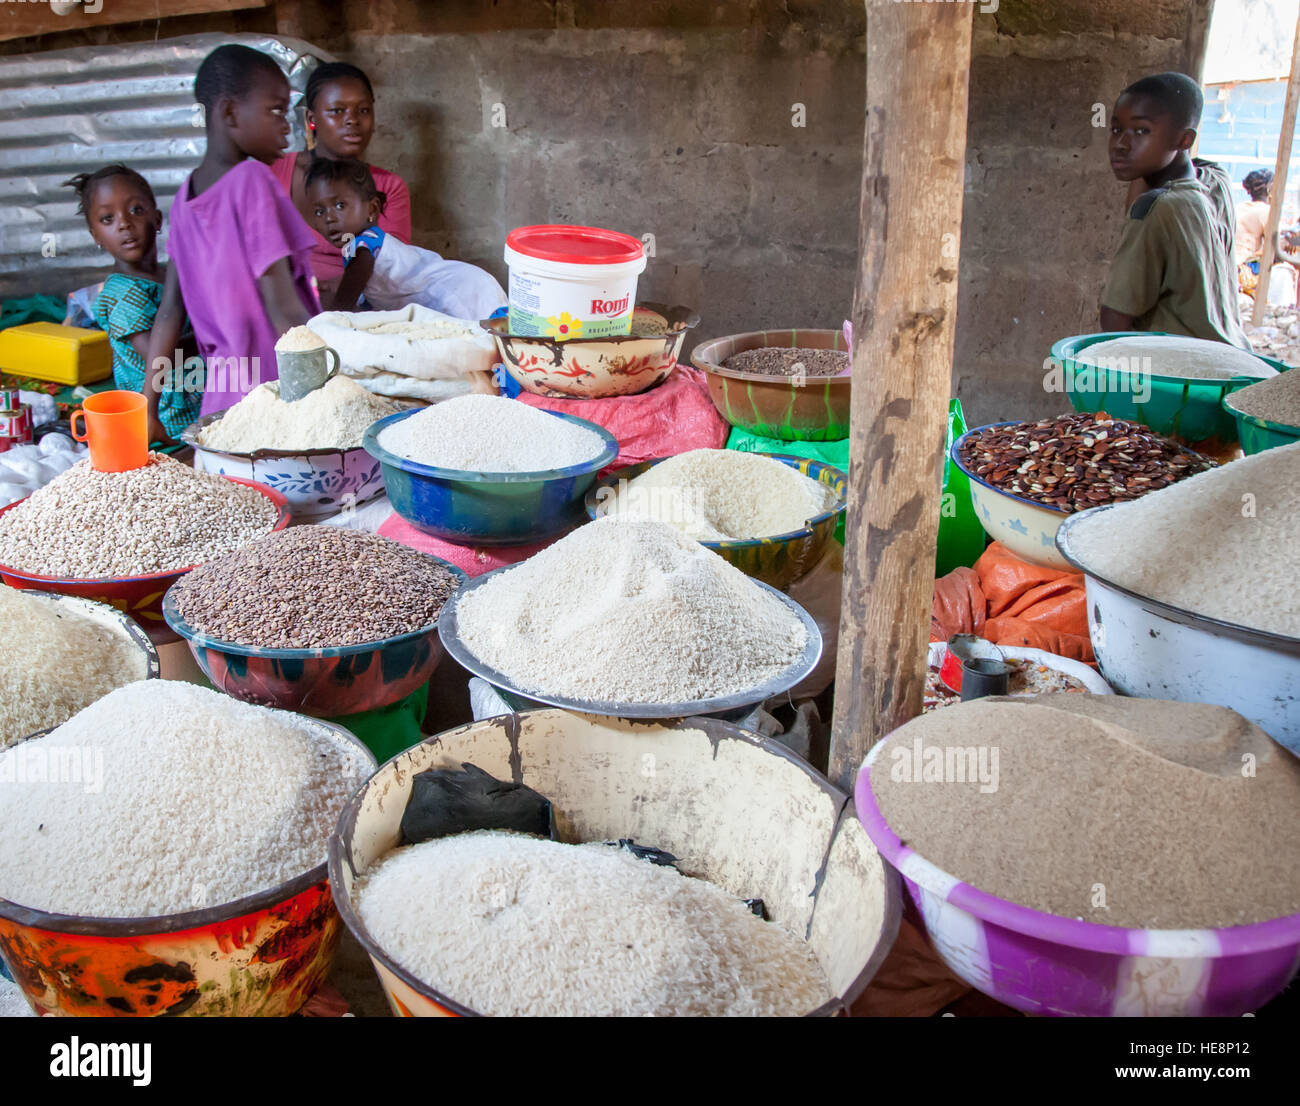 Children at market stall selling rice and other food. The staple foods rice, beans and cassava flour are particularly important for the people of Sierra Leone. After the Ebola epidemic, they are once again available in sufficient quantities Stock Photo